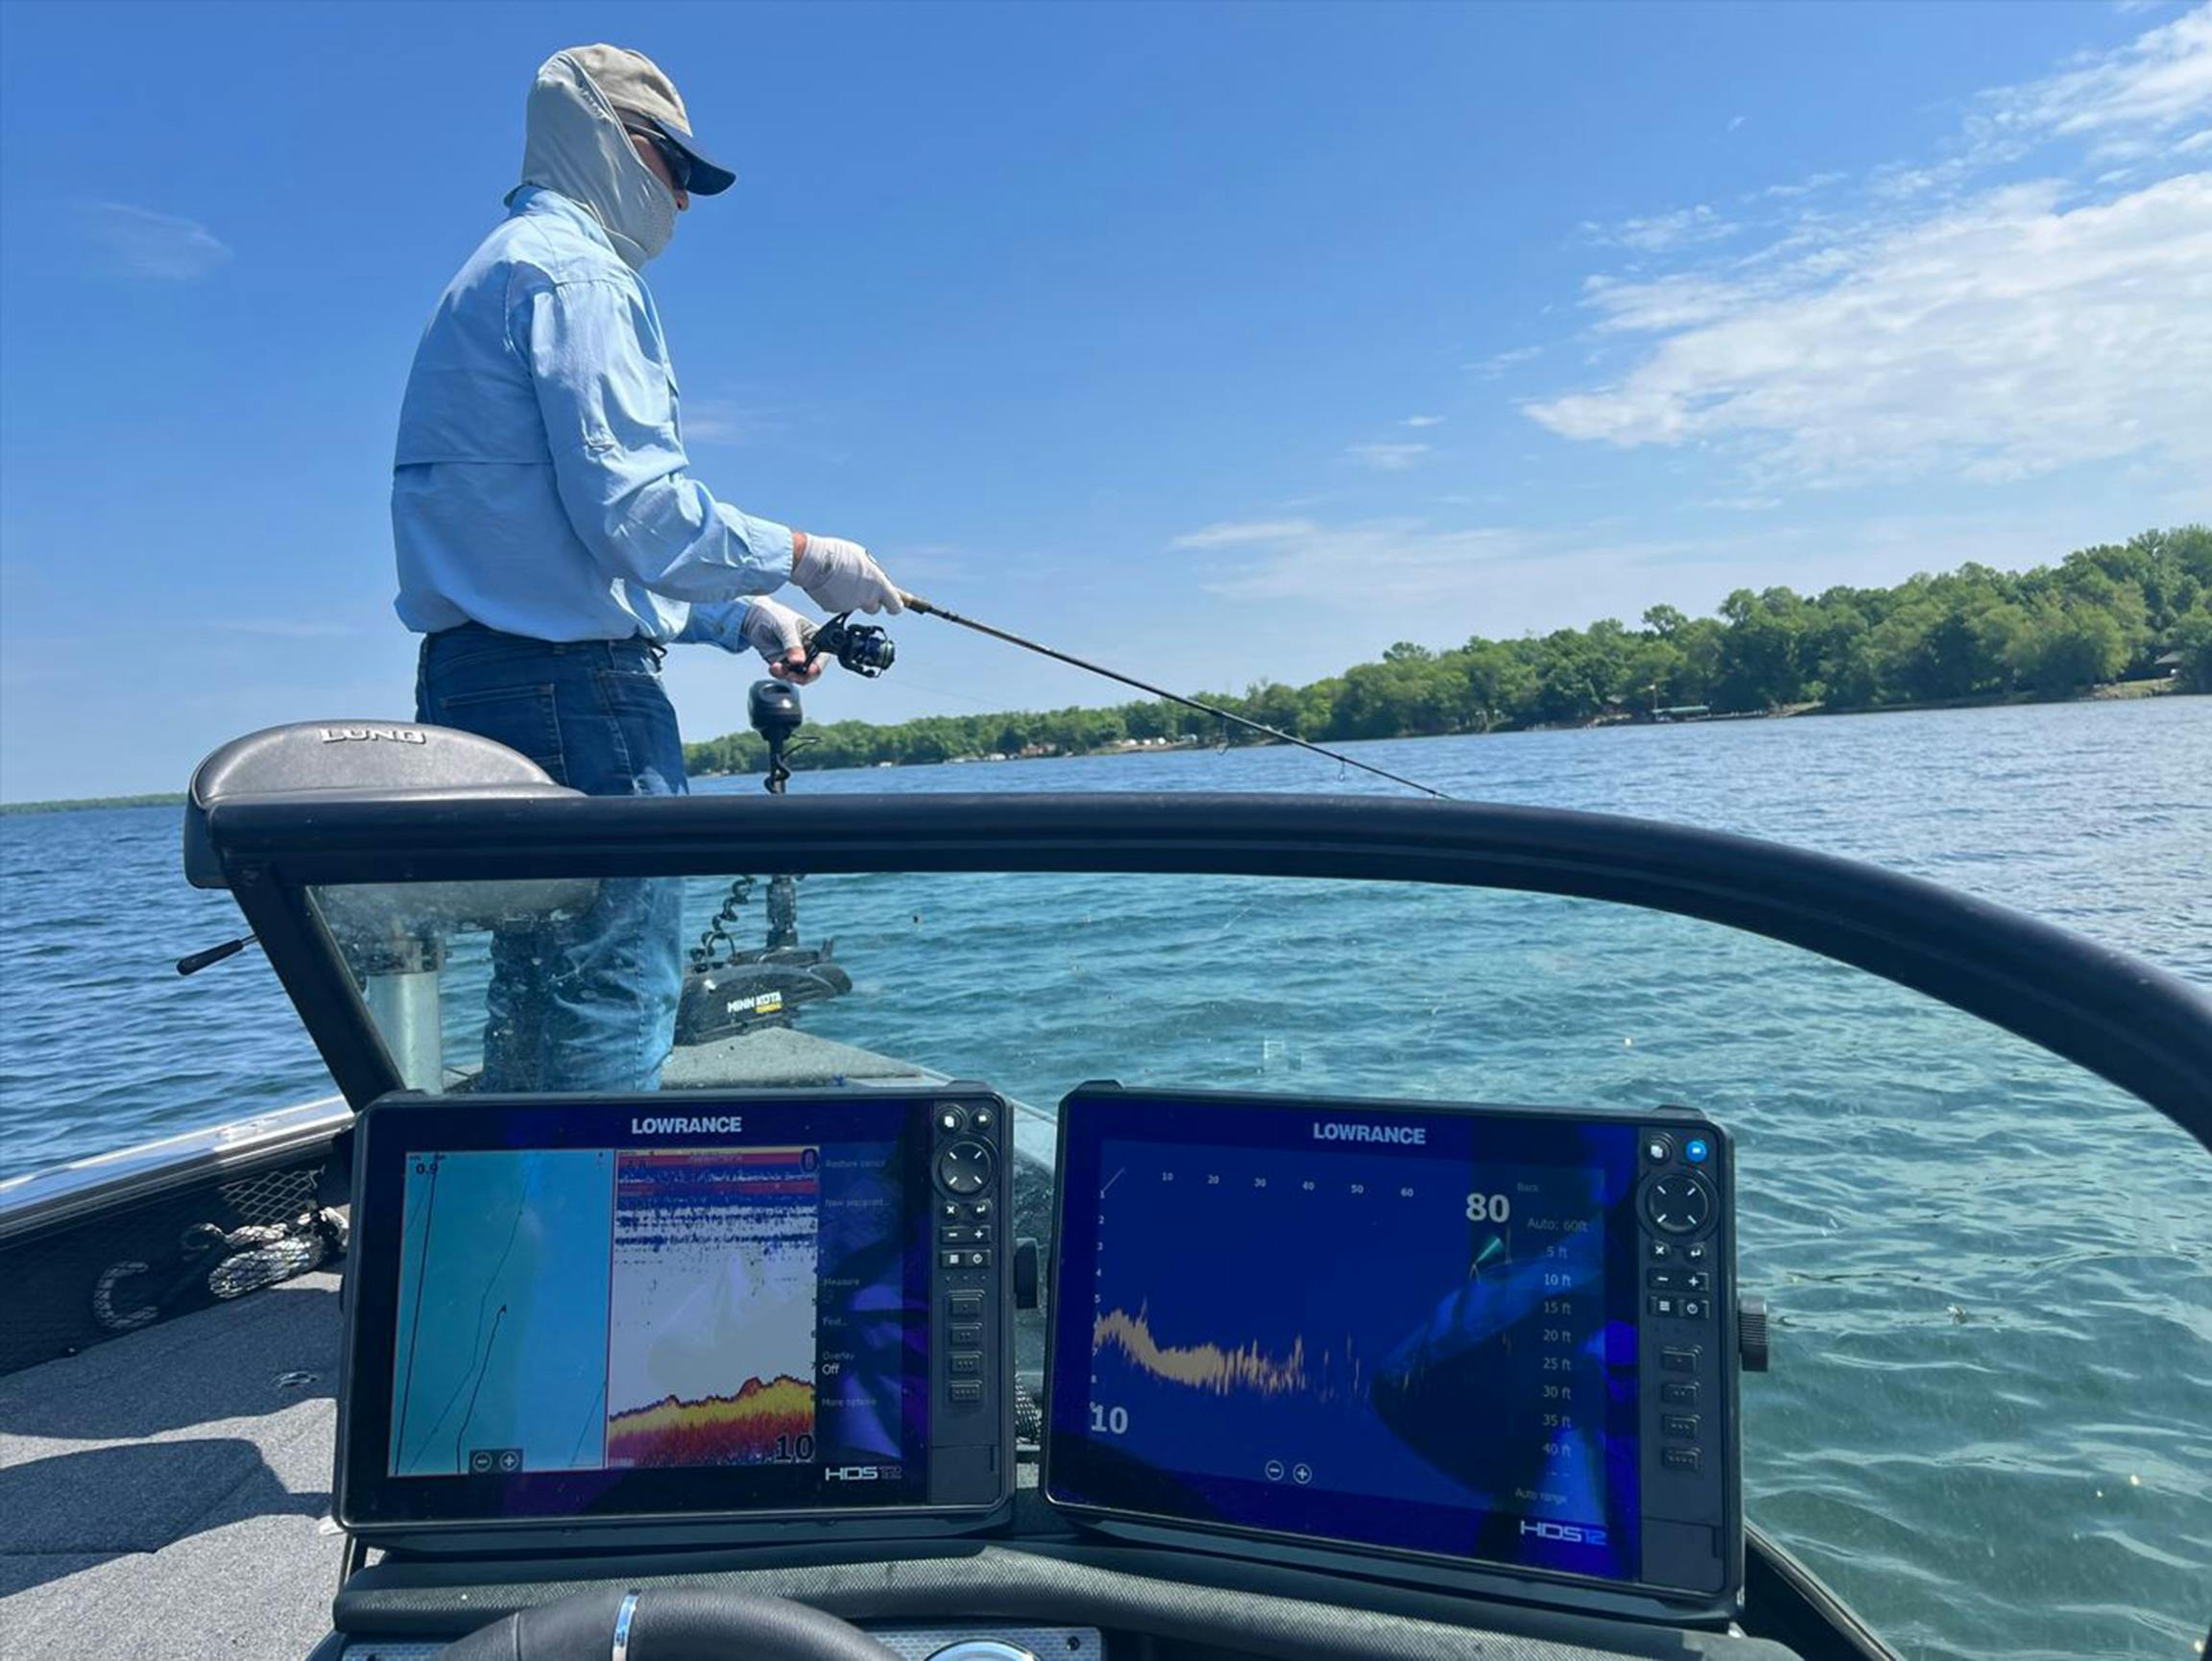 Does live sonar mean the end of fishing, or just the end of fishing as we  know it?